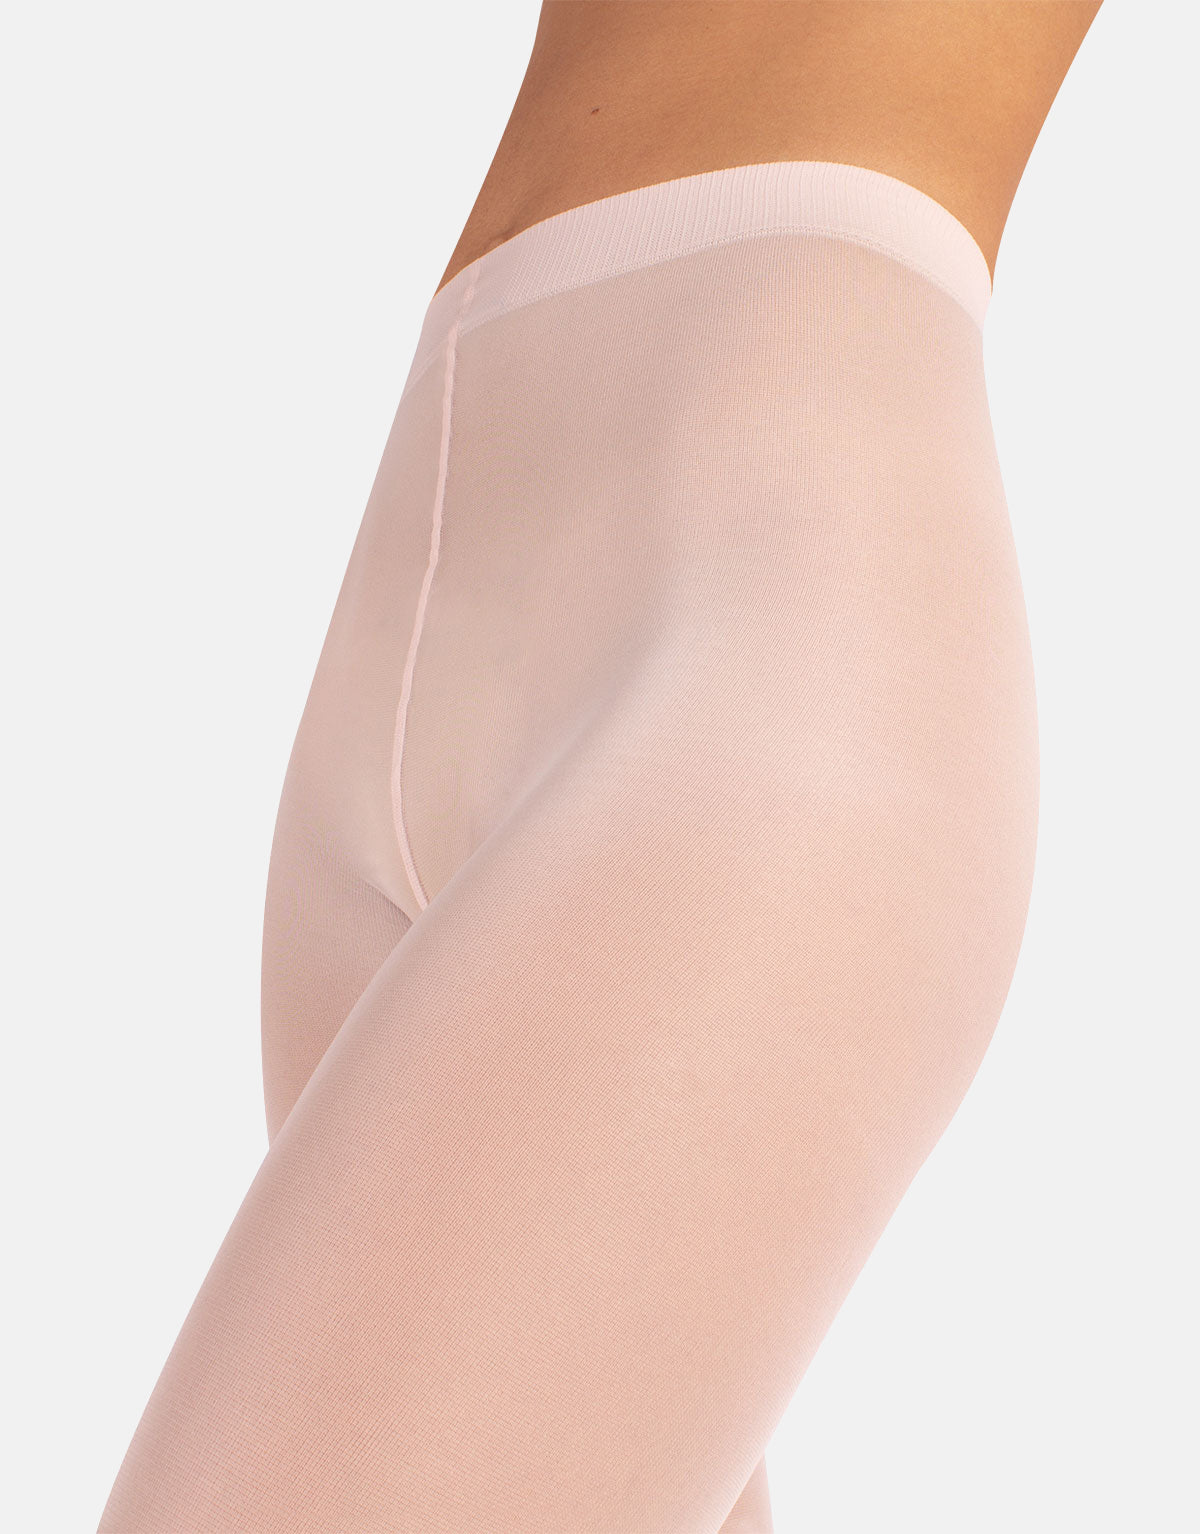 Calzitaly Dance Tights 40 Den - Plain opaque ballet pink tights with flat seams and cotton gusset.